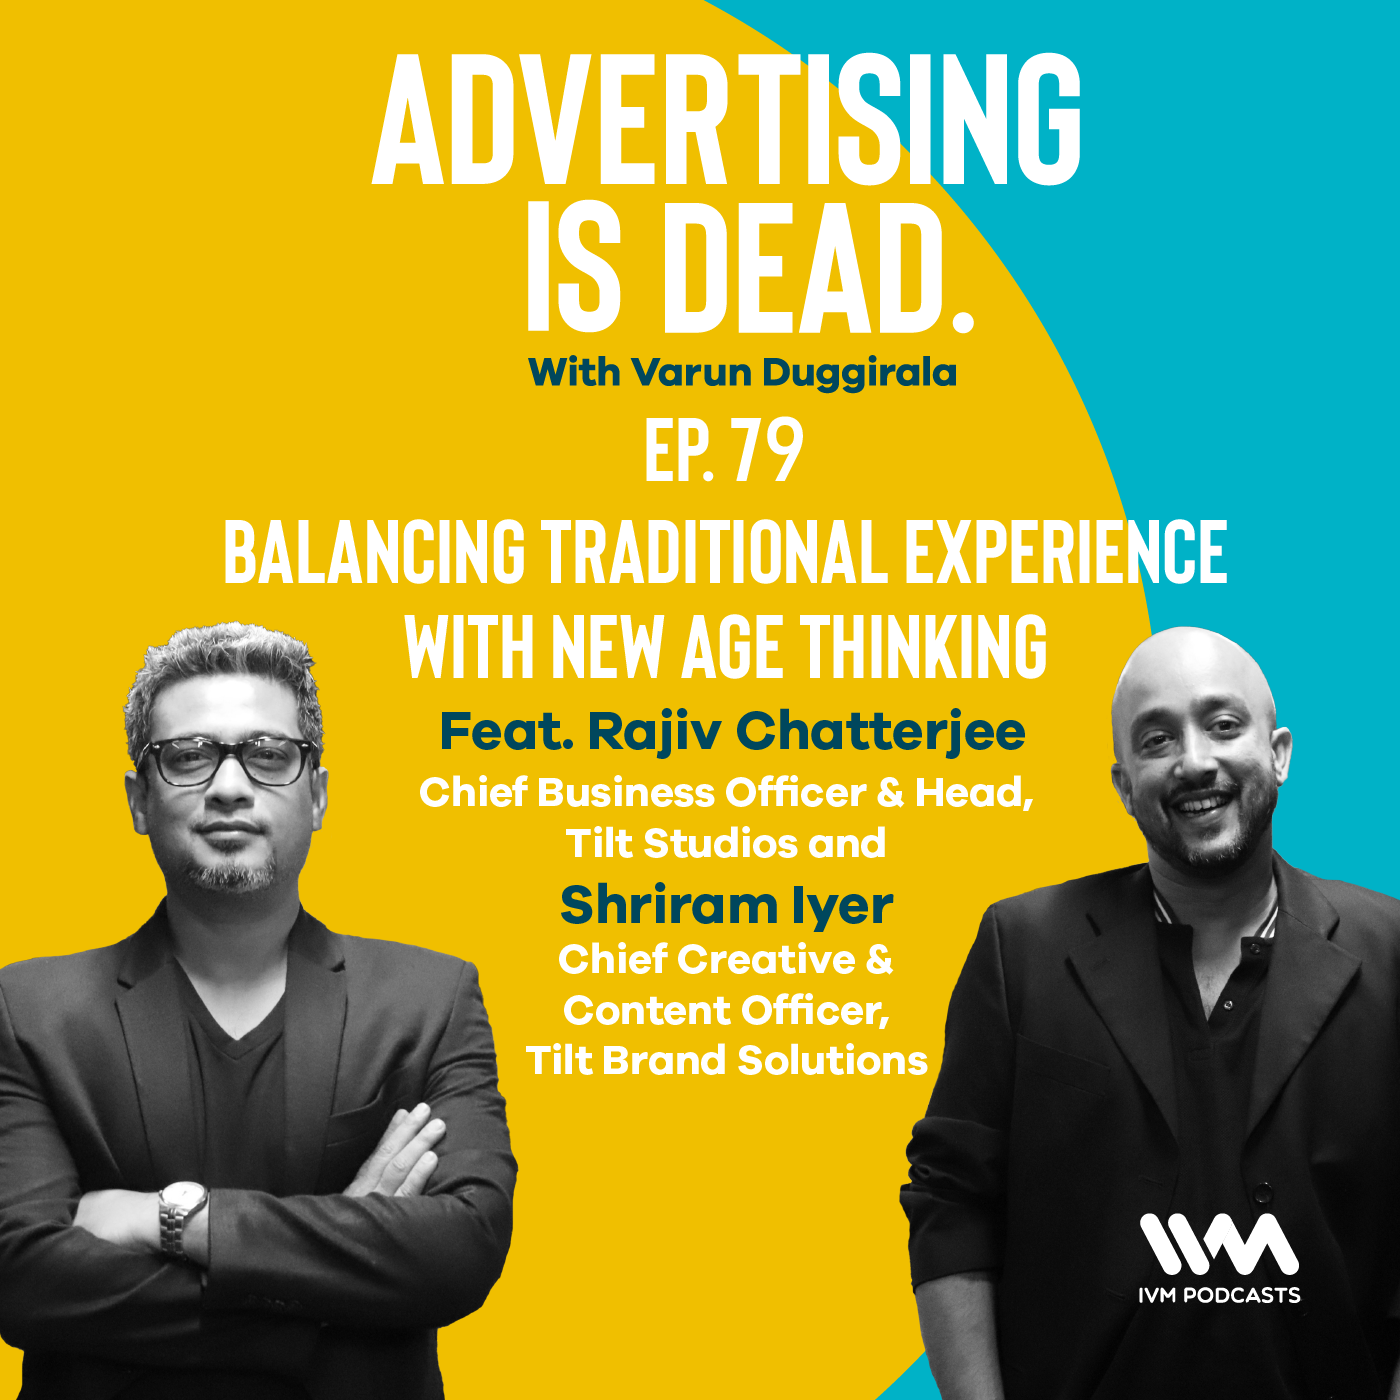 Rajeev Chatterjee & Shriram Iyer on Balancing Traditional Experience With New Age Thinking